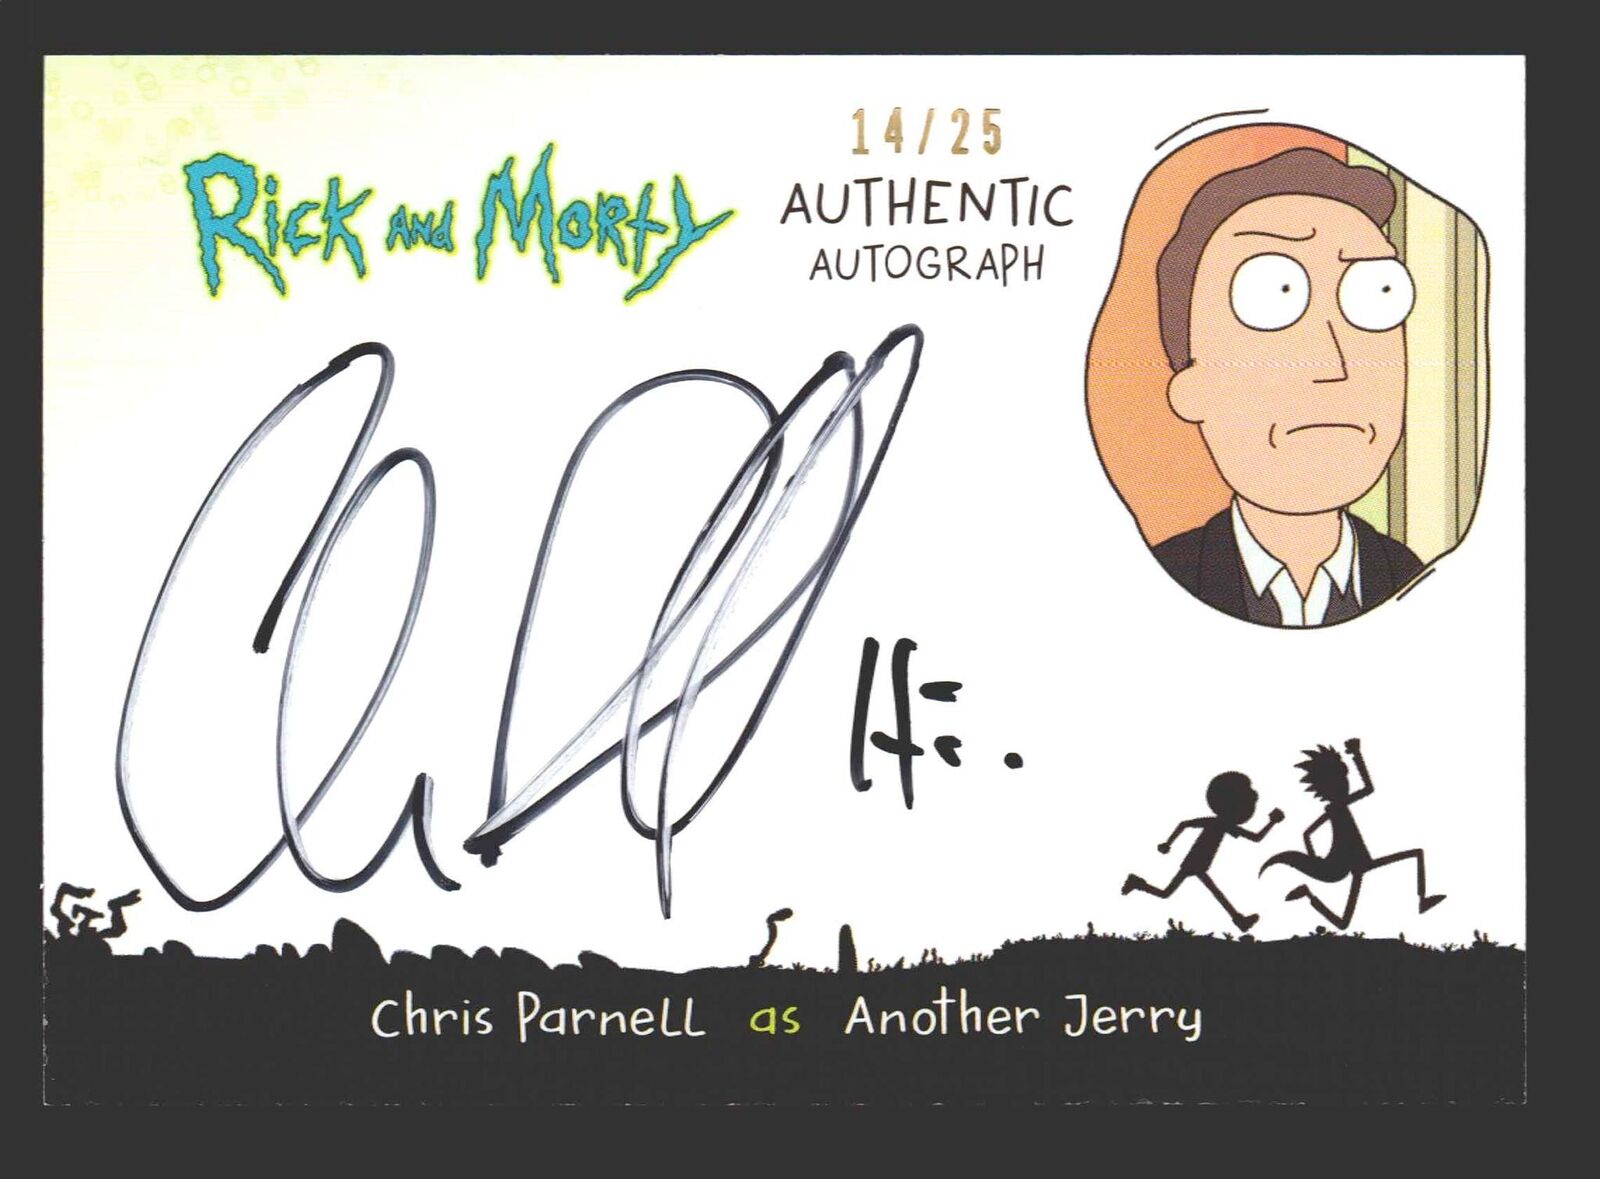 2019 Rick and Morty Season 2 CP-AJ Chris Parnell as Another Jerry Autograph Card